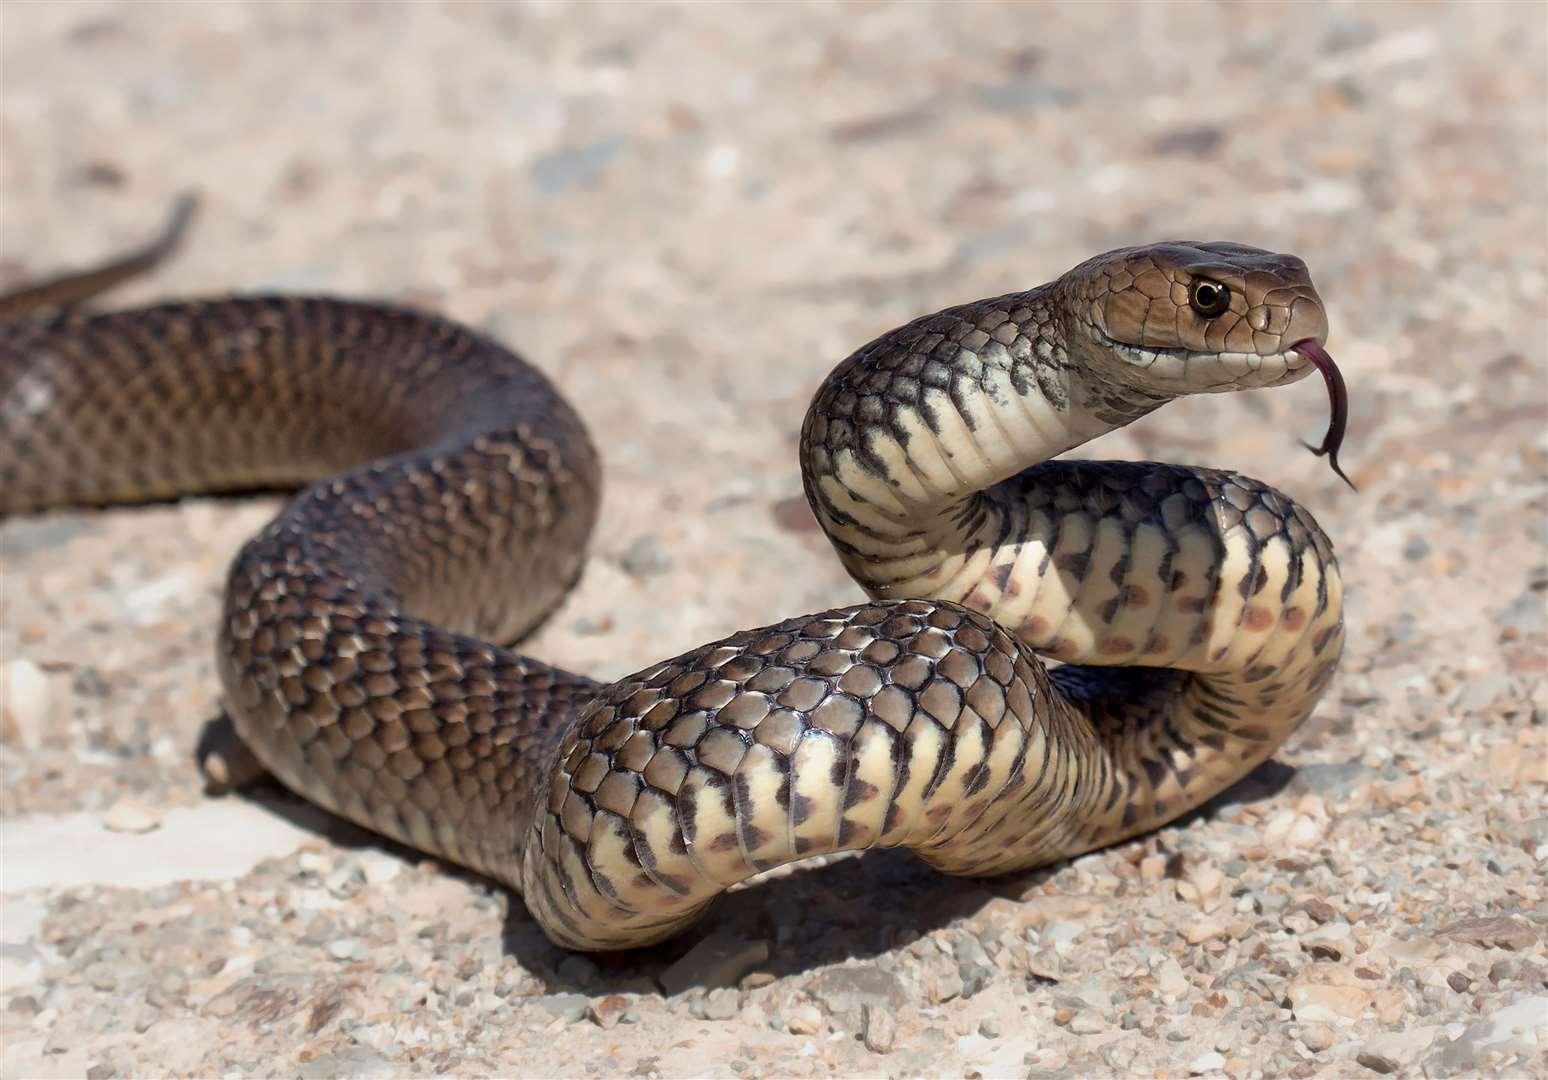 The majority of calls about escaped reptiles occur between June and August. Image: iStock.